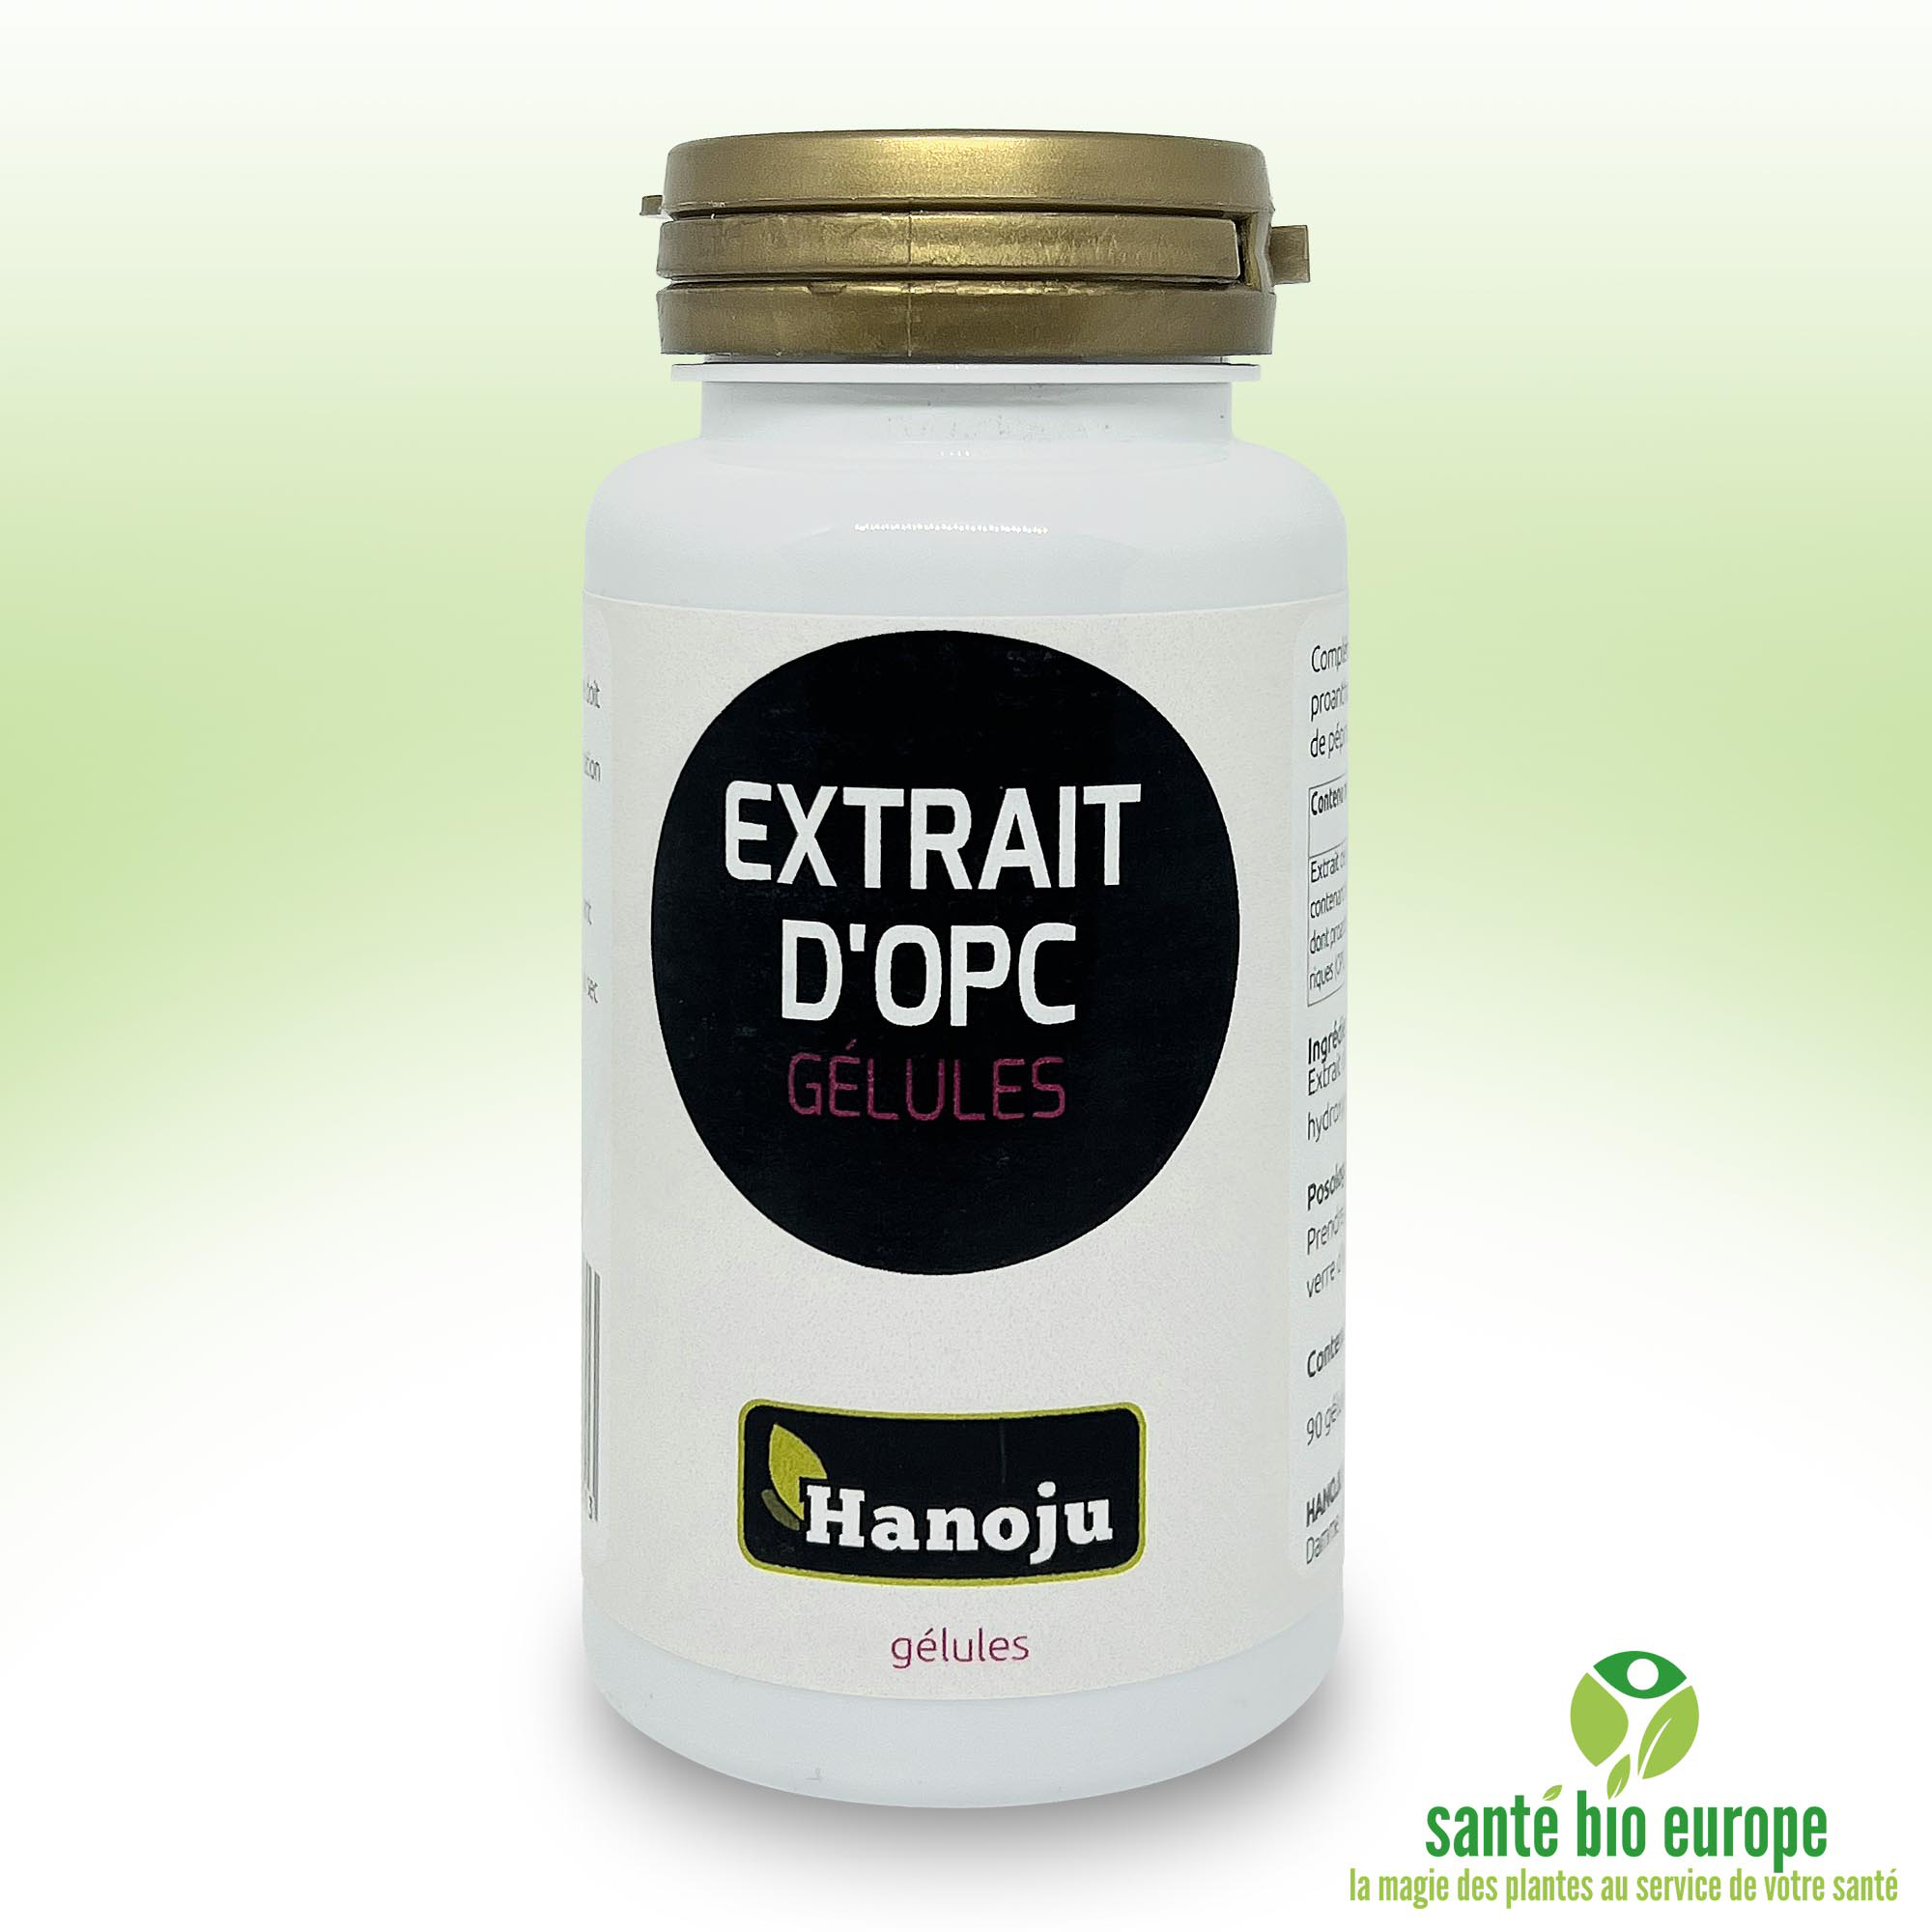 OPC extract 150 front